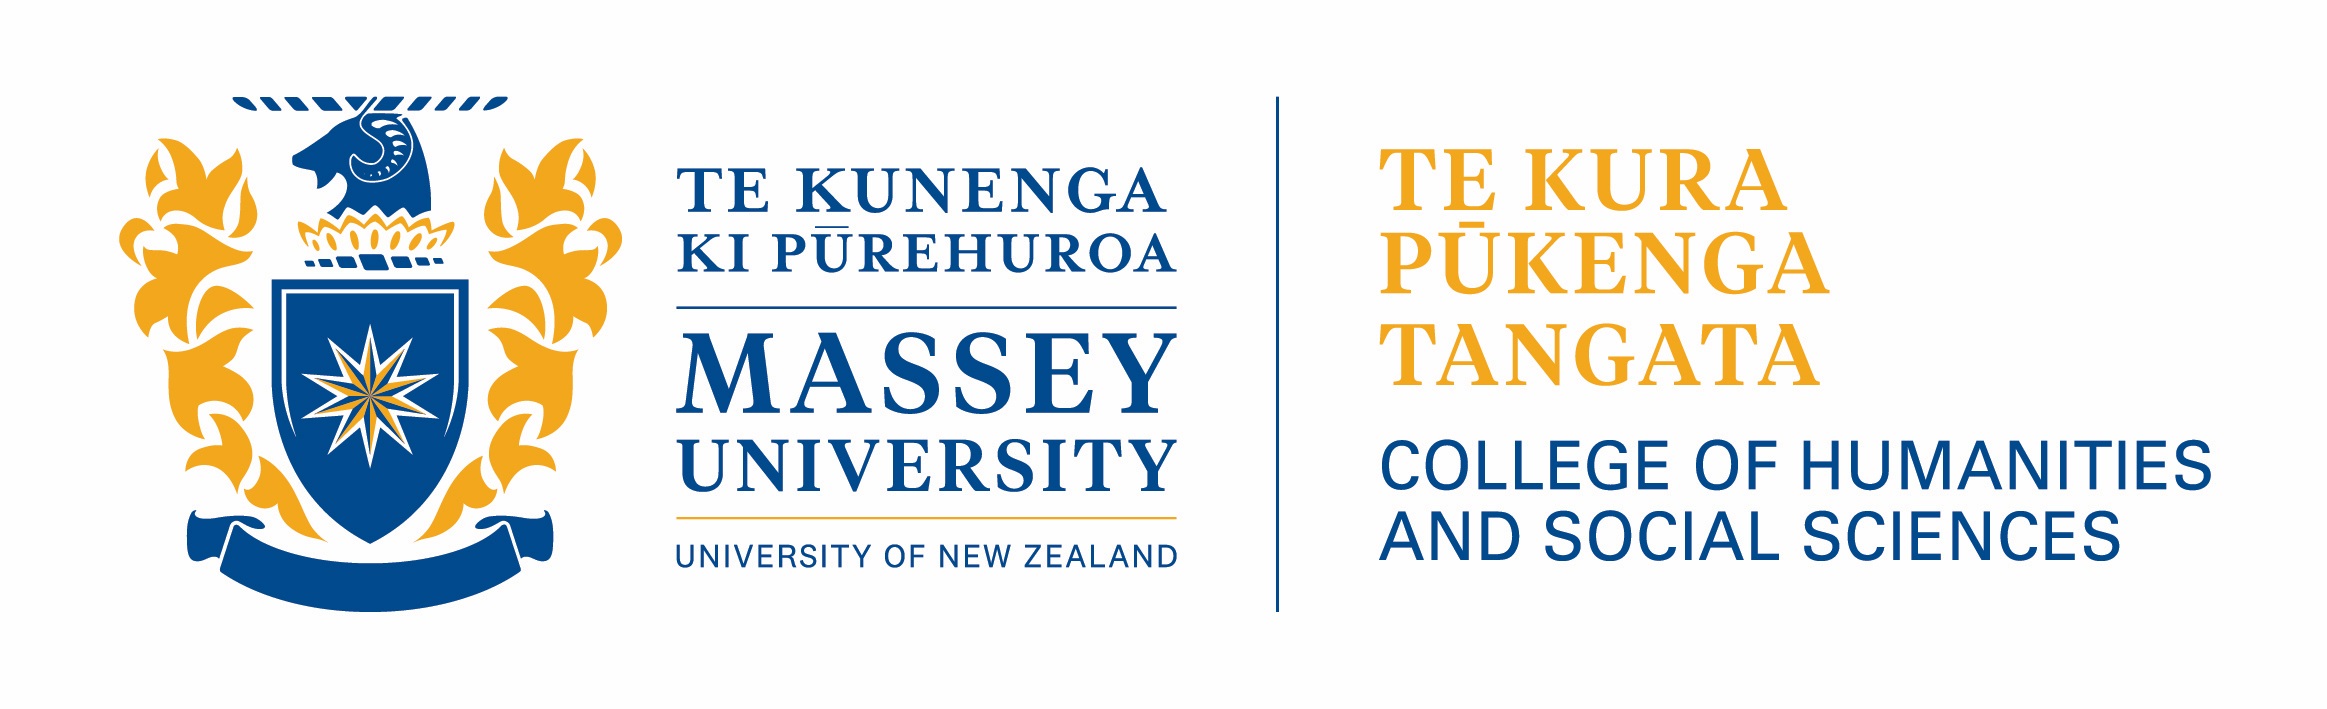 Massey University College of Humanities and Social Sciences logo